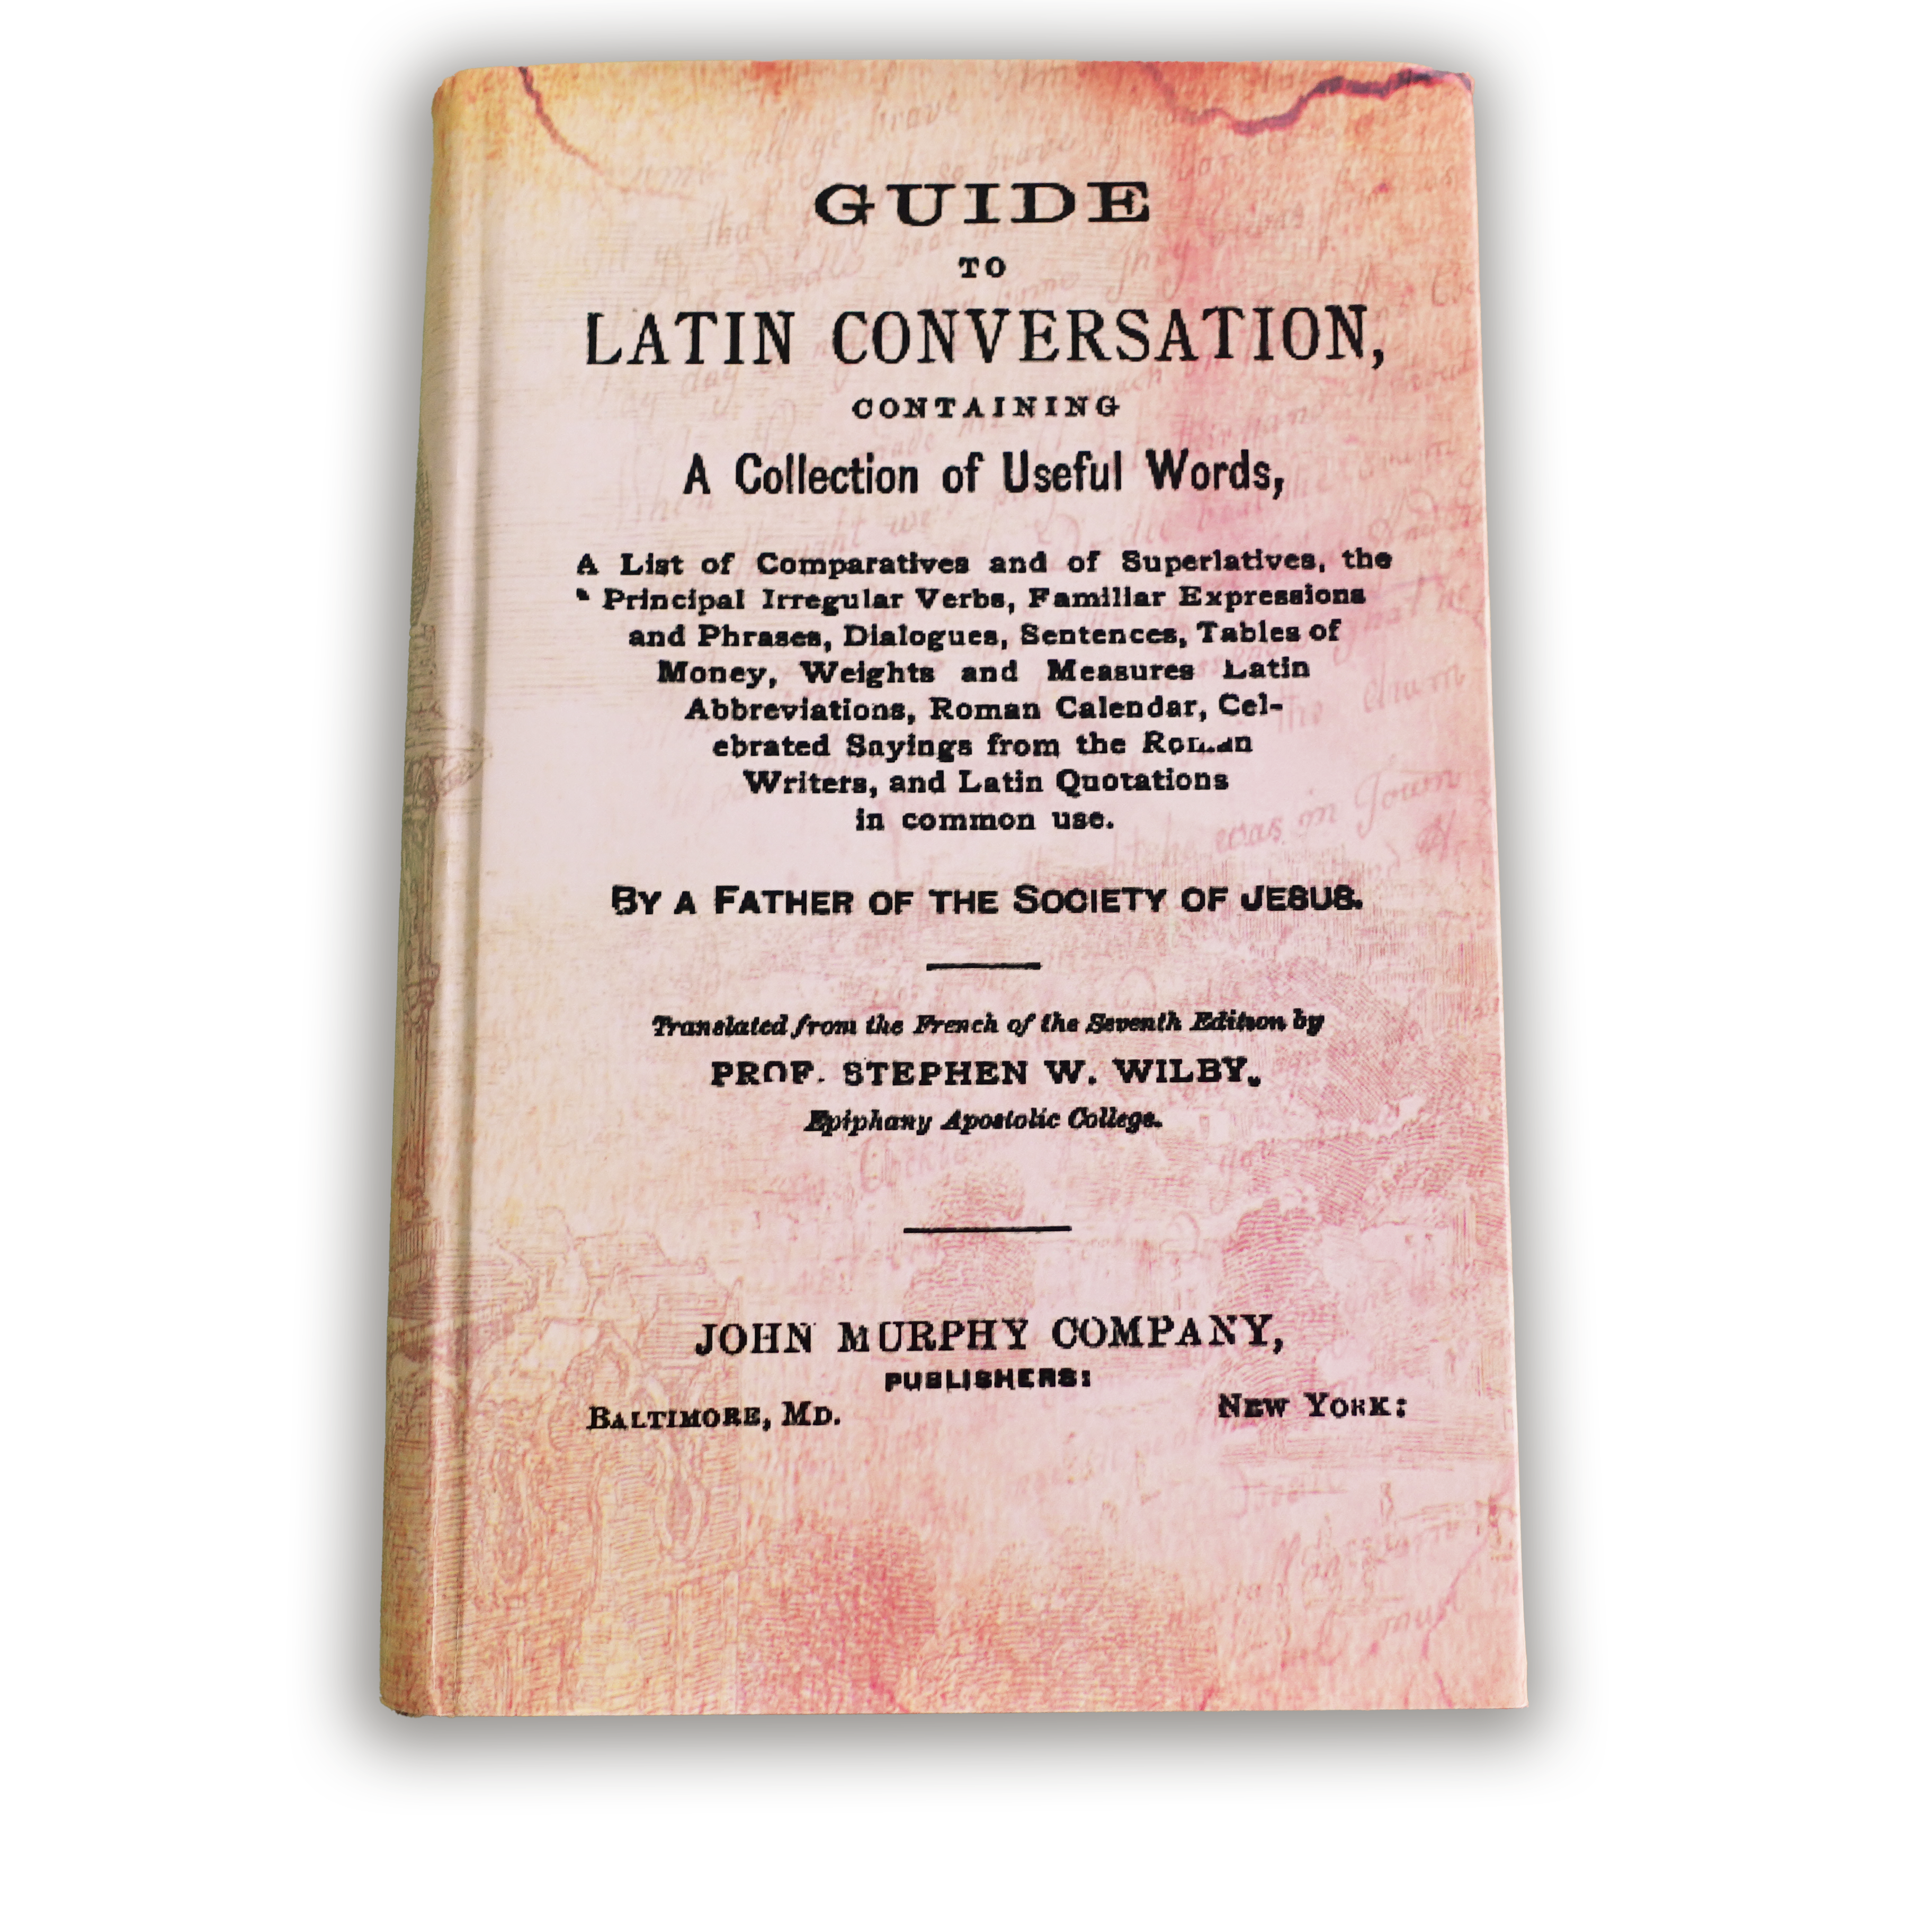 Wilby's Guide to Latin Conversation